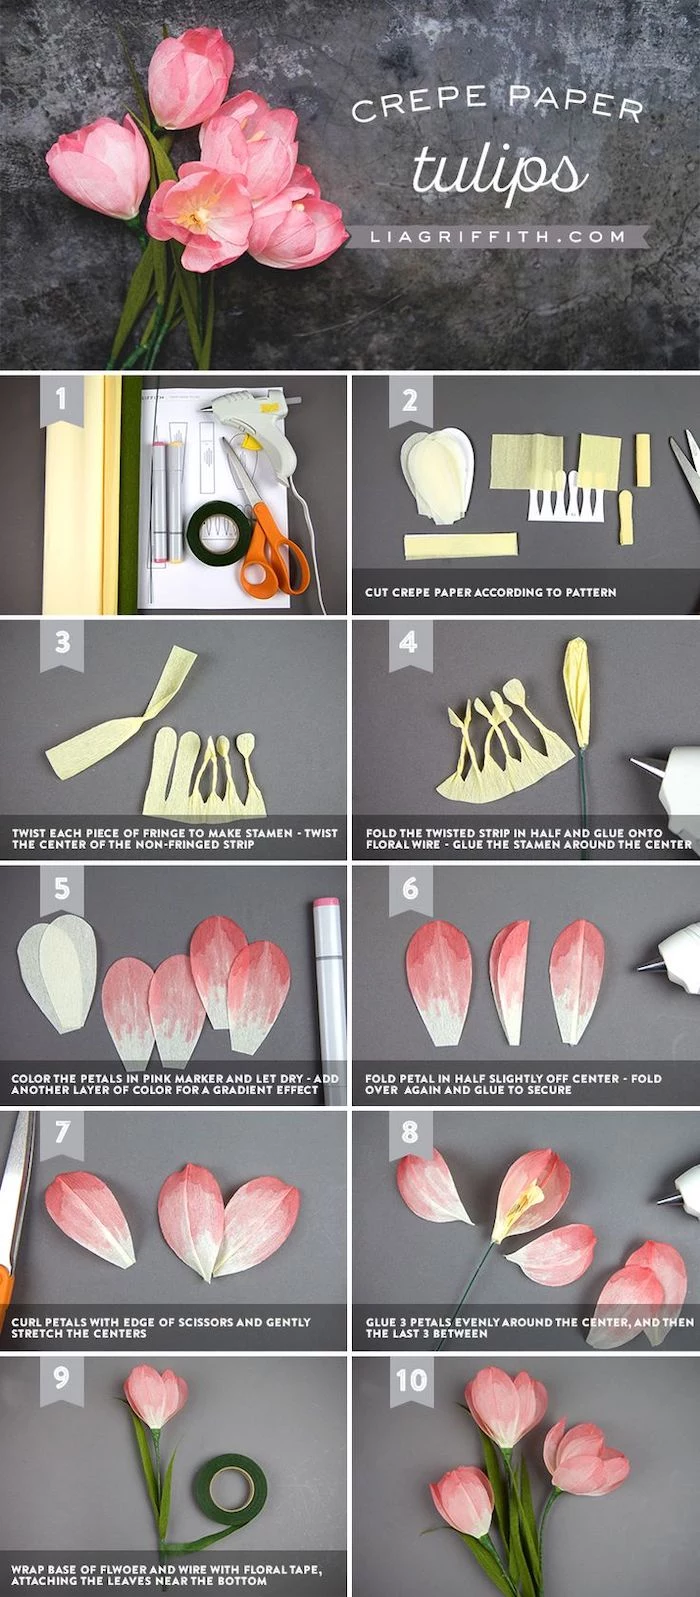 how to make tulips out of crepe paper, photo collage of step by step diy tutorial, how to make paper flowers easy